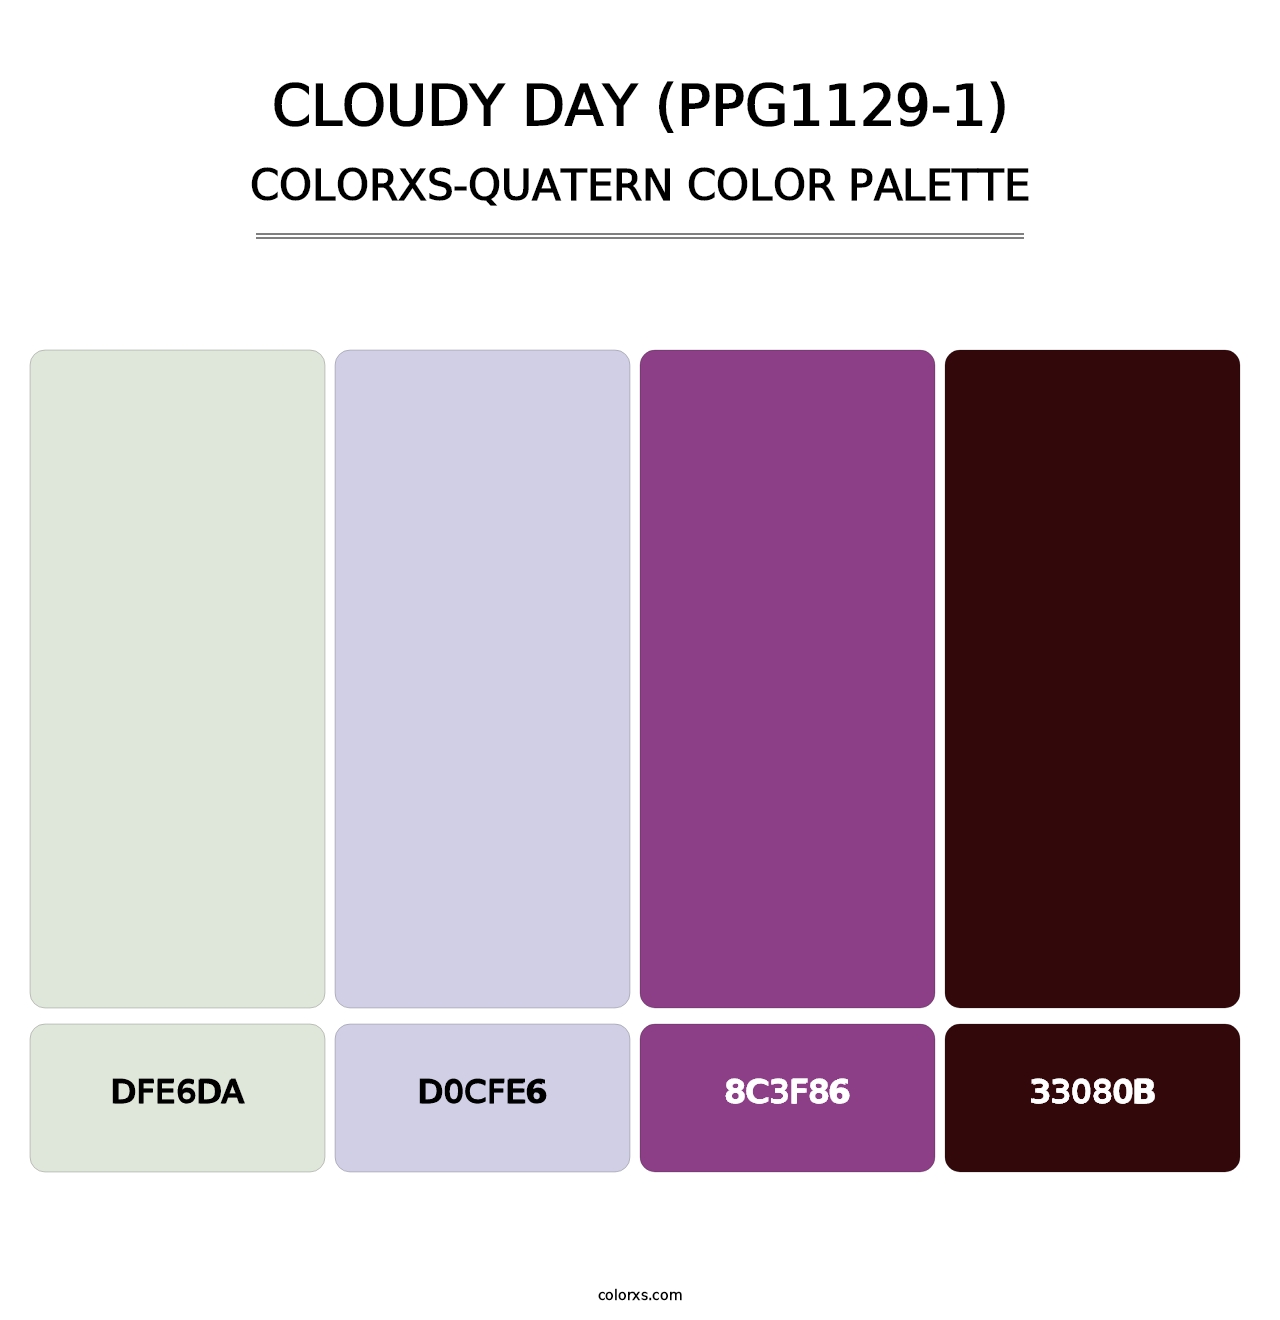 Cloudy Day (PPG1129-1) - Colorxs Quatern Palette